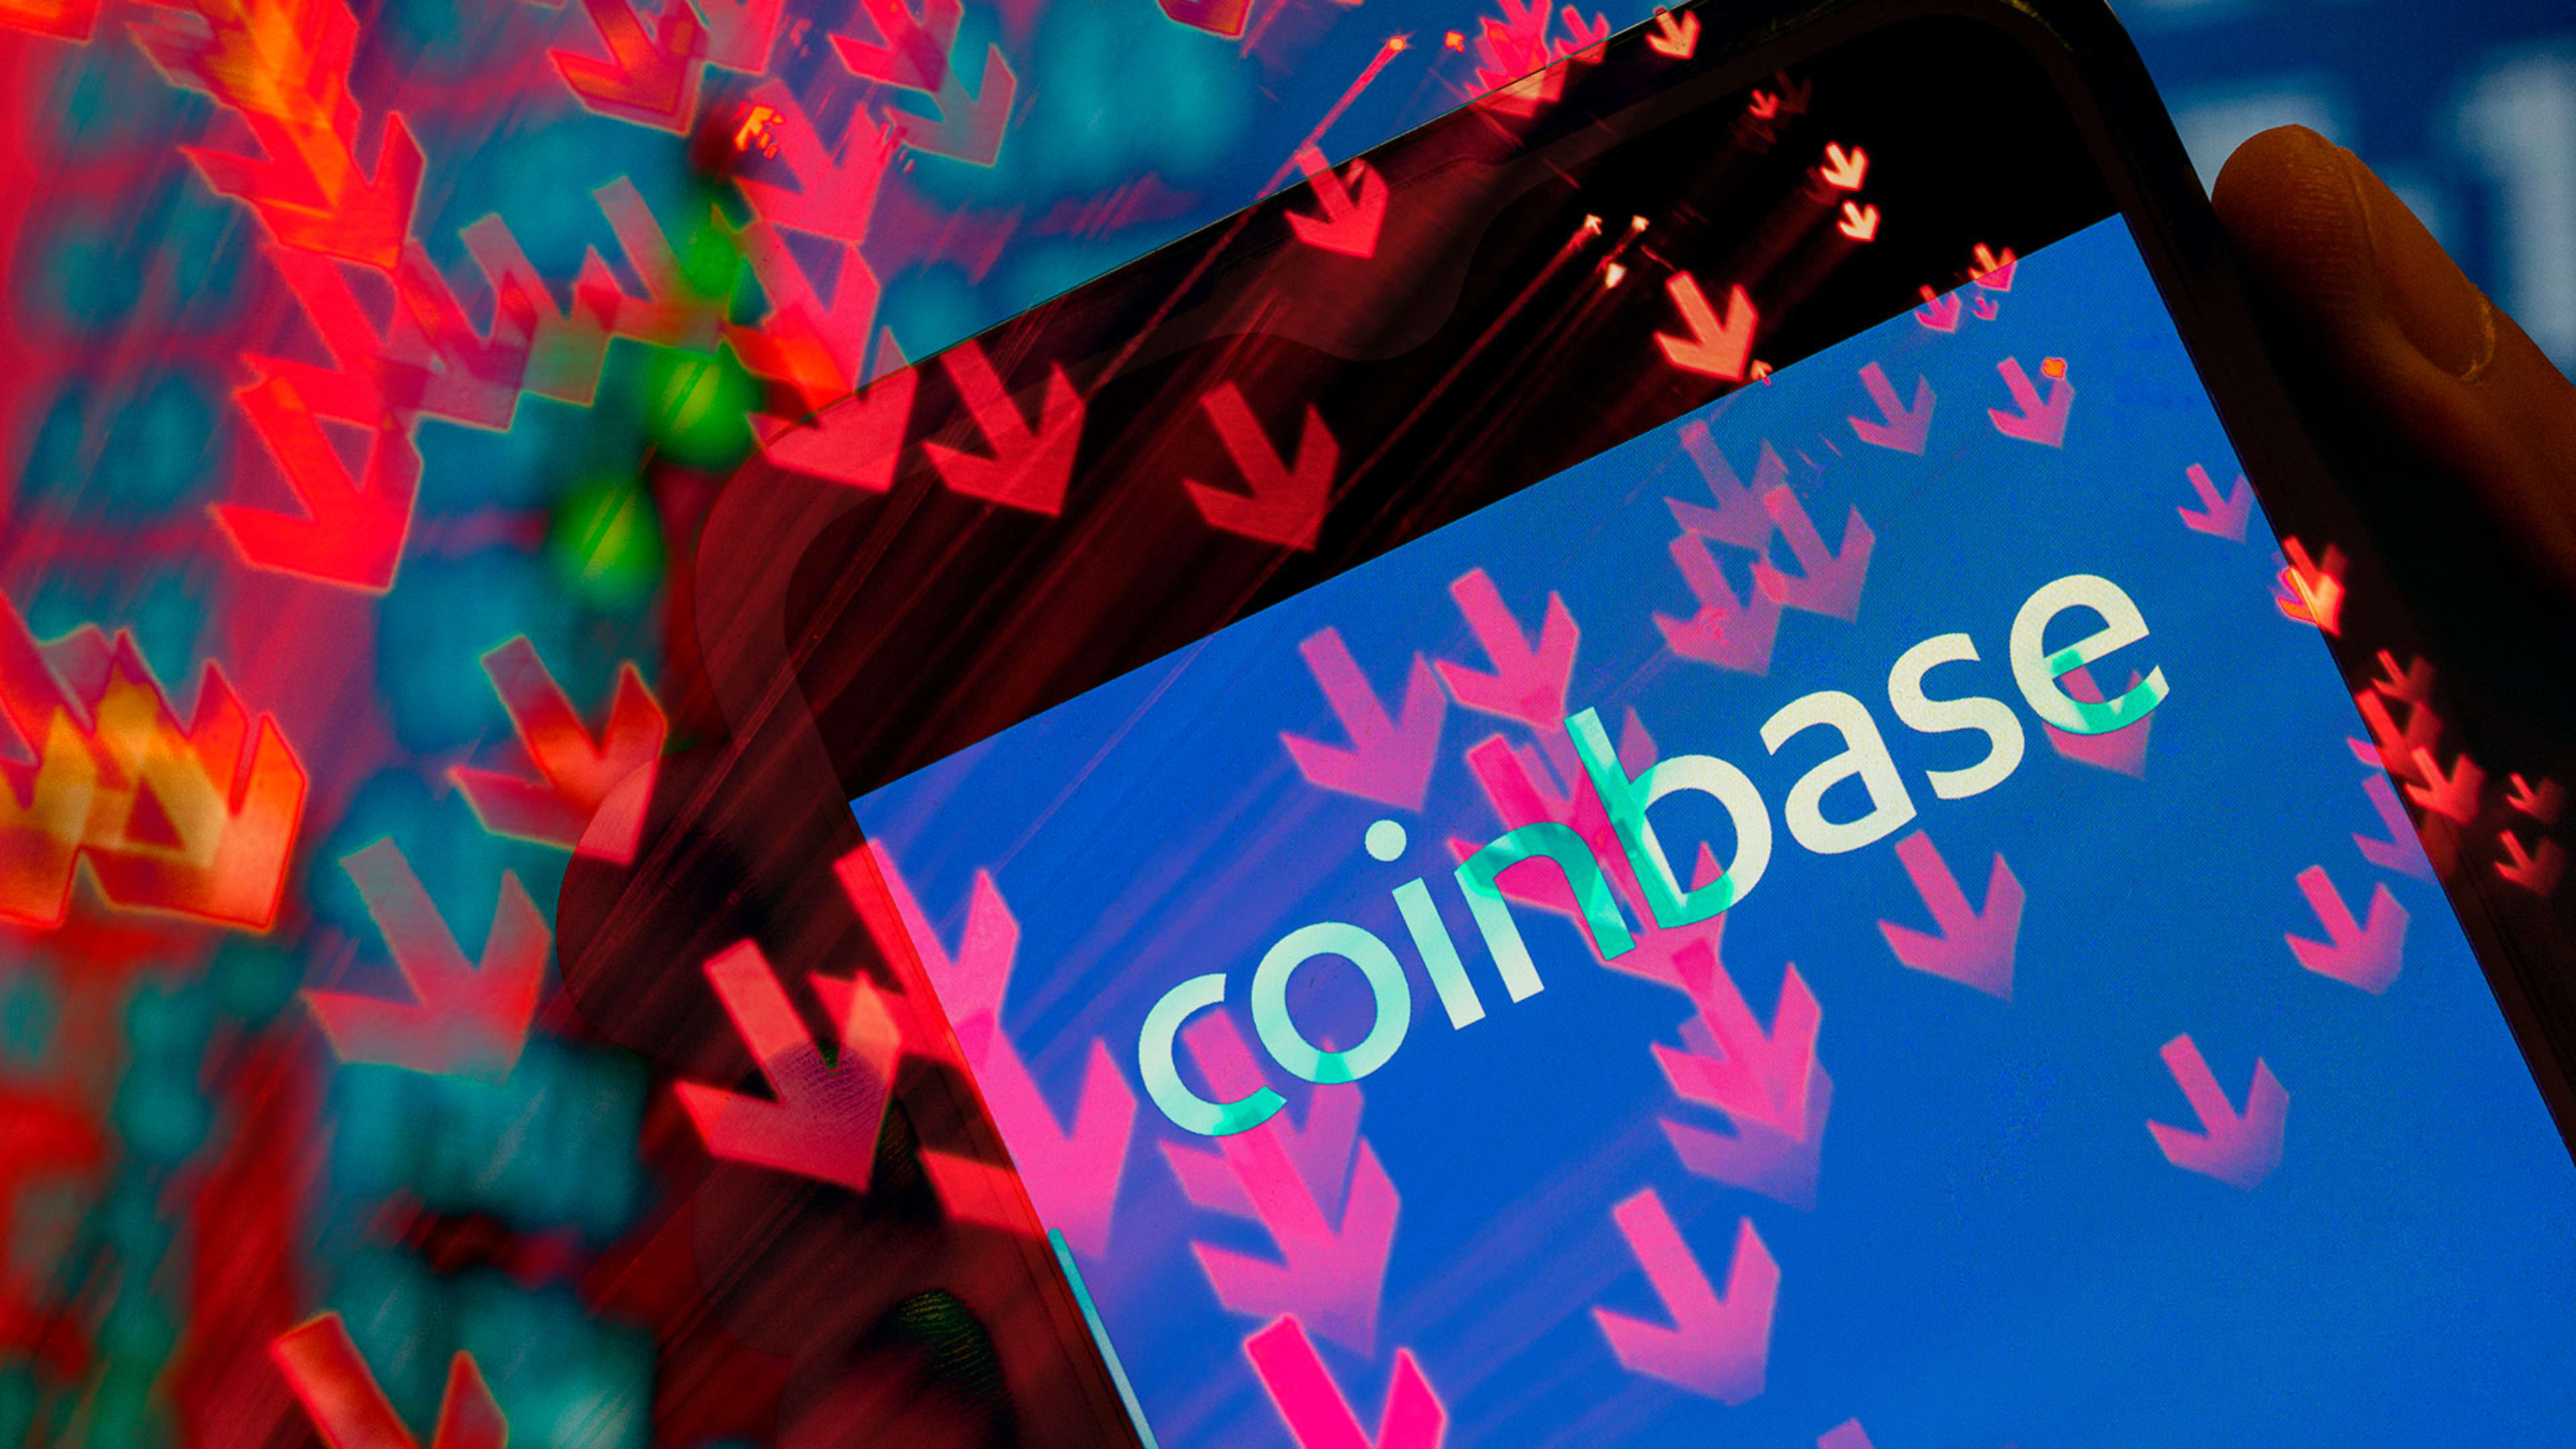 Coinbase stock price: COIN sinks after $1.1 billion net income loss